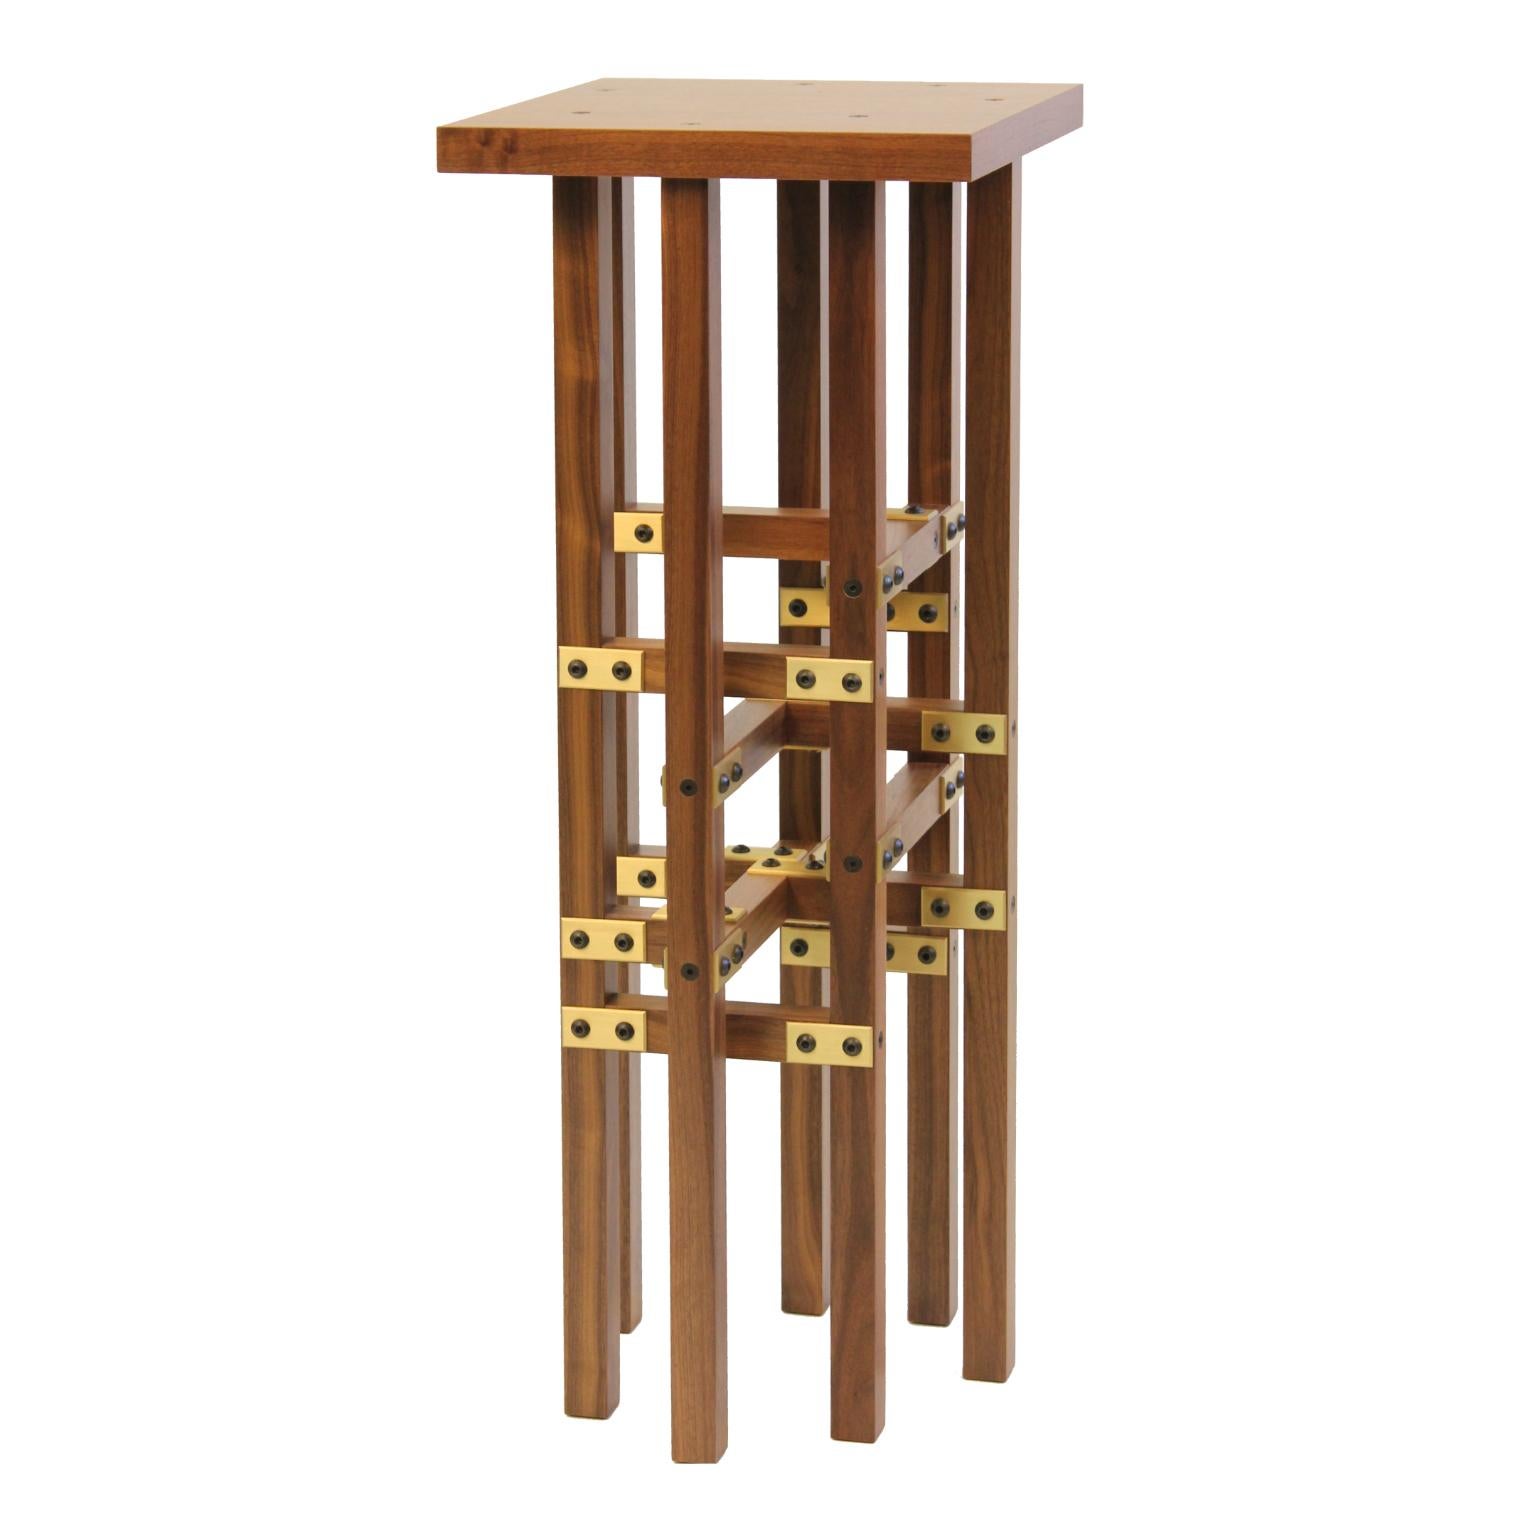 Contemporary Industrial Pedestal Table by Peter Harrison, Brass Metal and Walnut